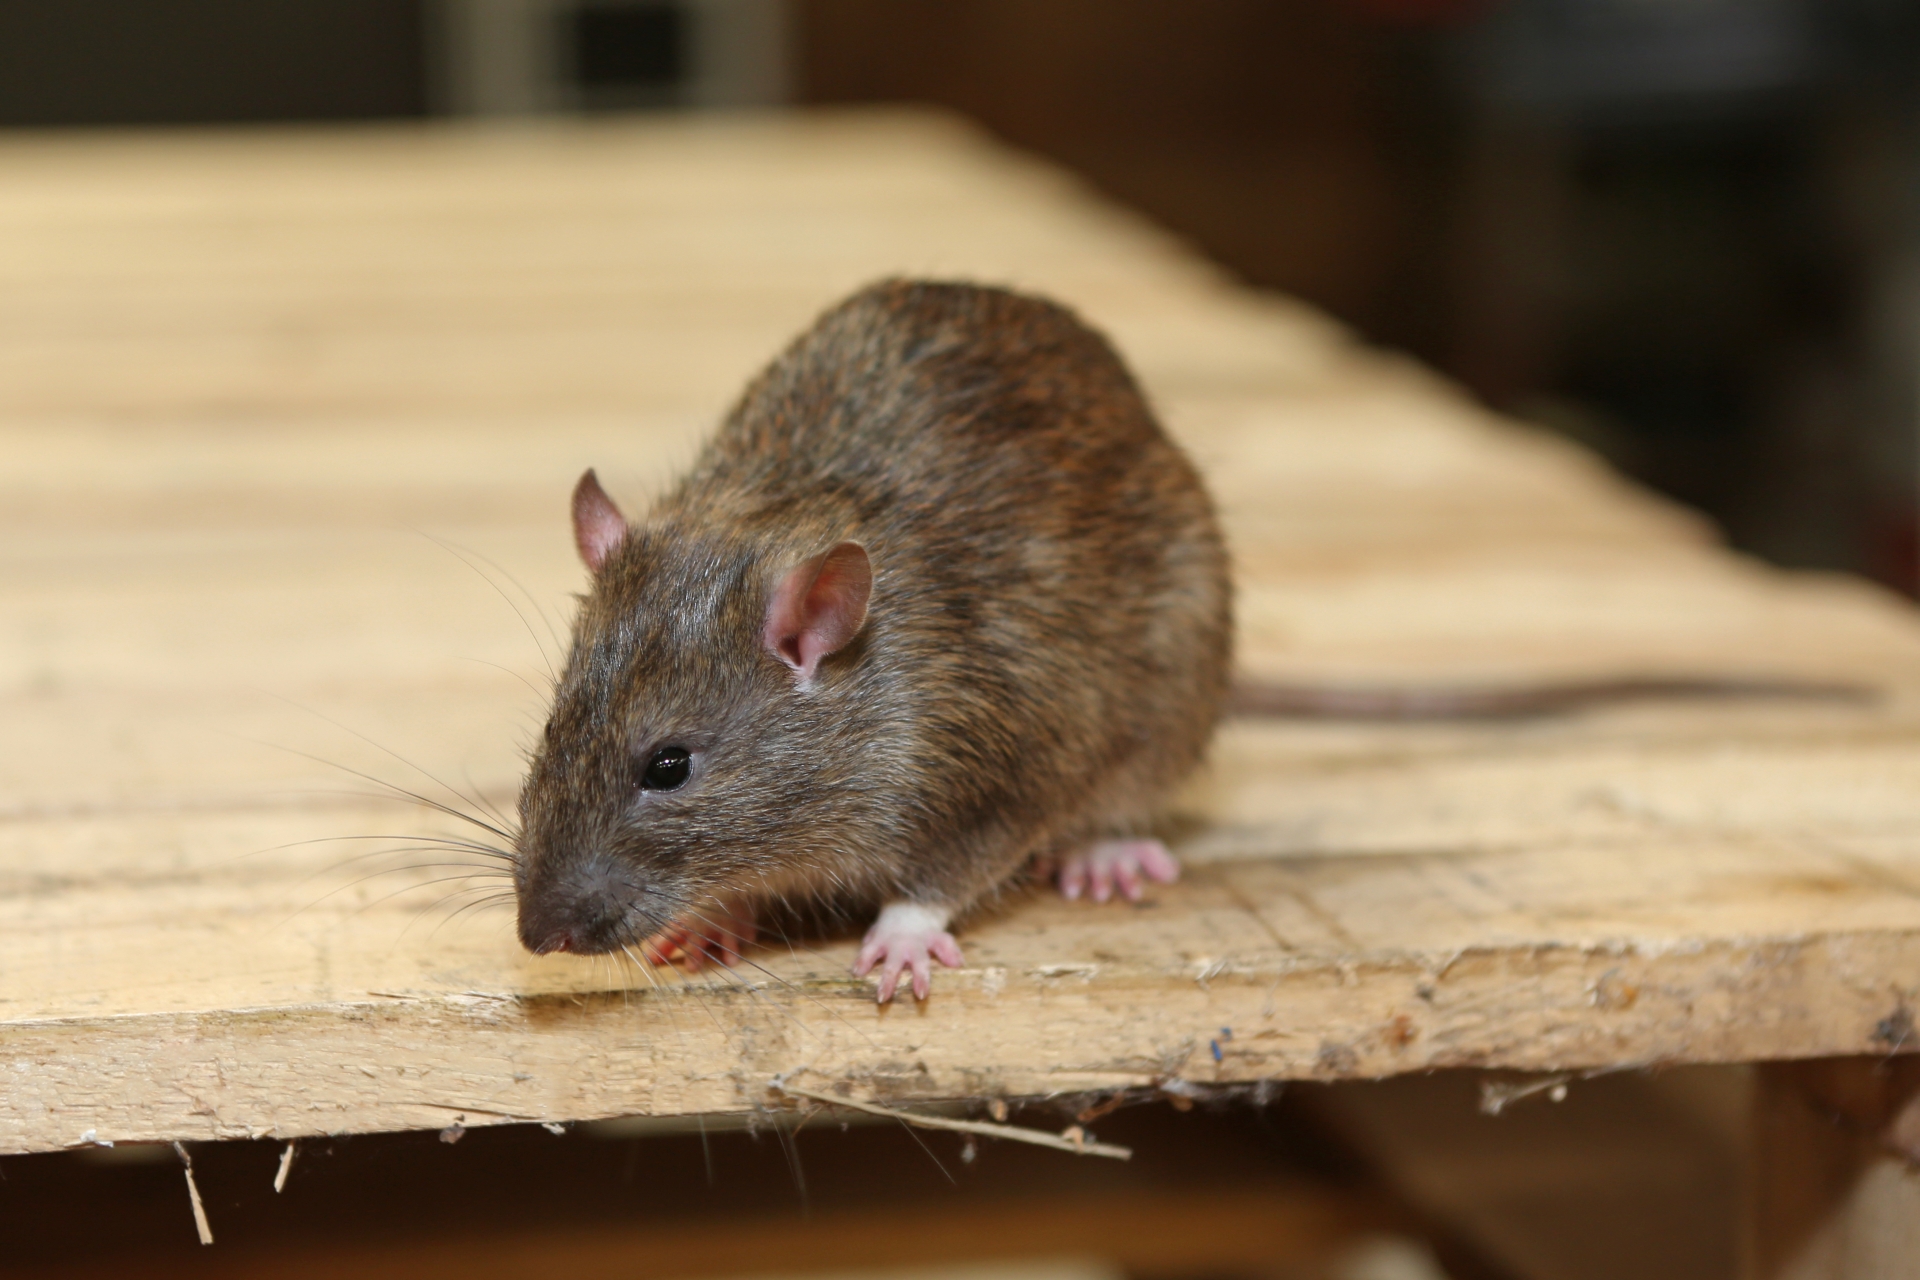 Rat extermination, Pest Control in Molesey, East Molesey, West Molesey, KT8. Call Now 020 8166 9746